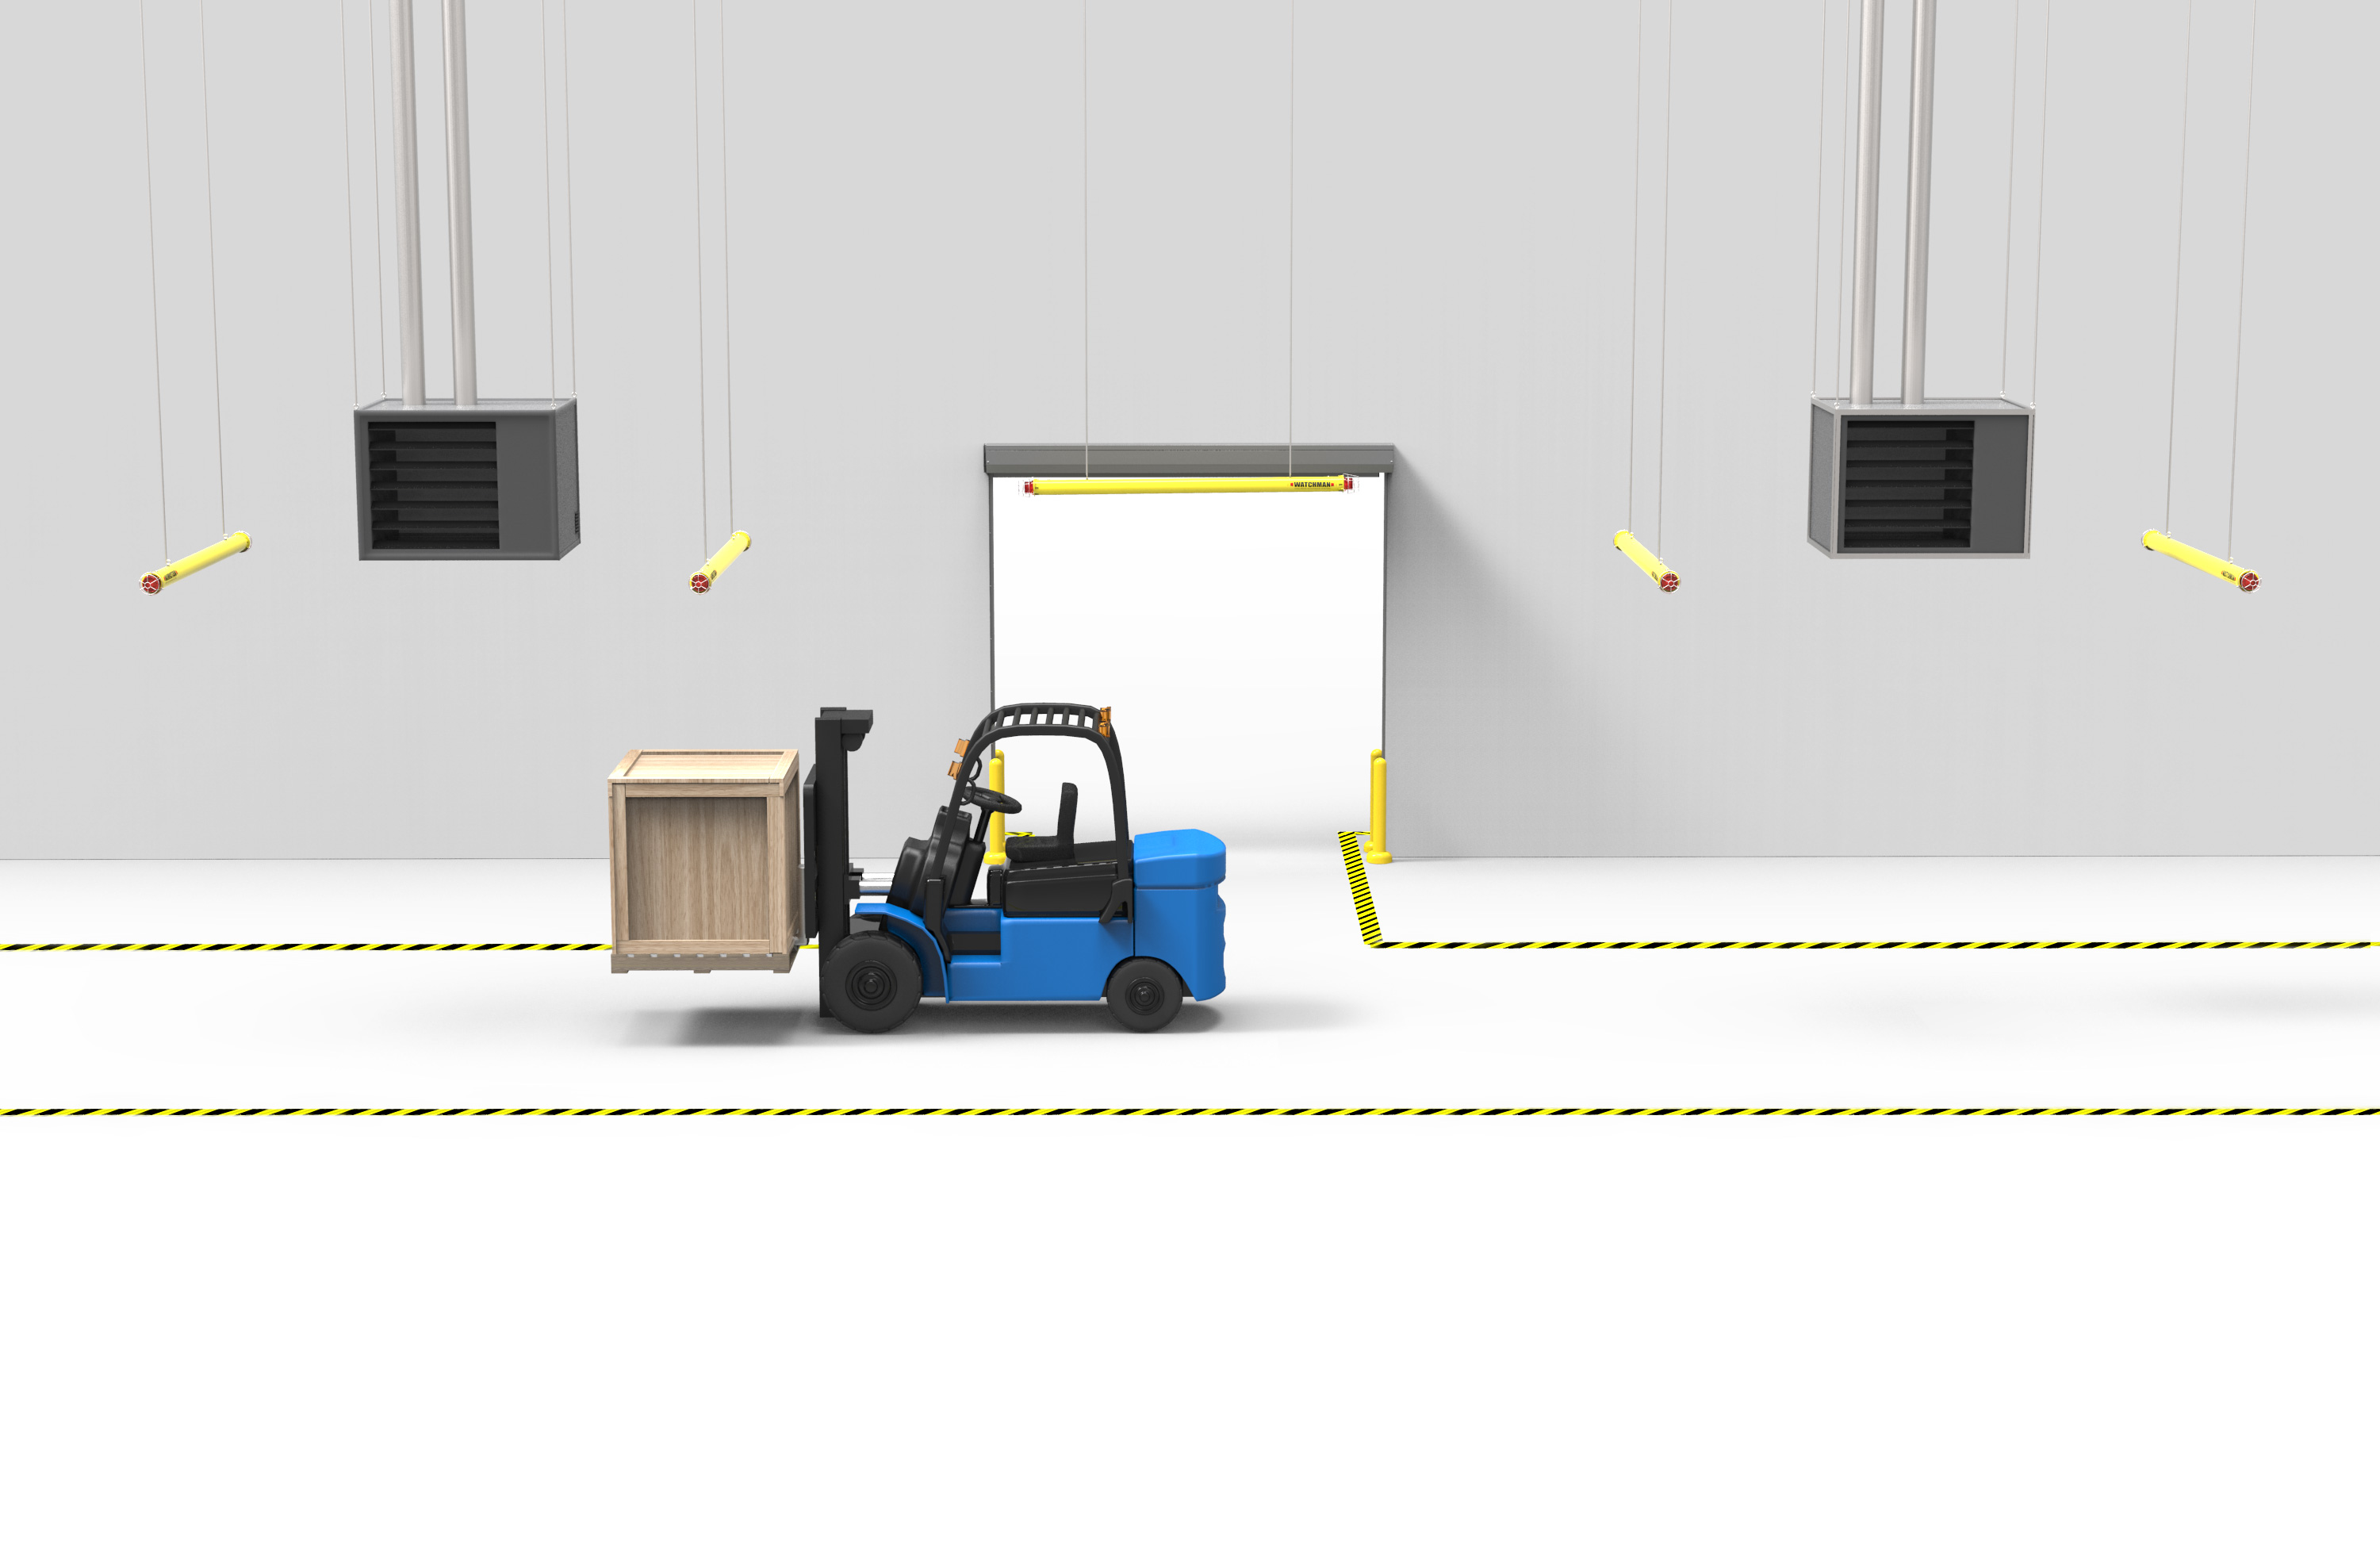 Forklift collision avoidance for hanging heaters and ducting